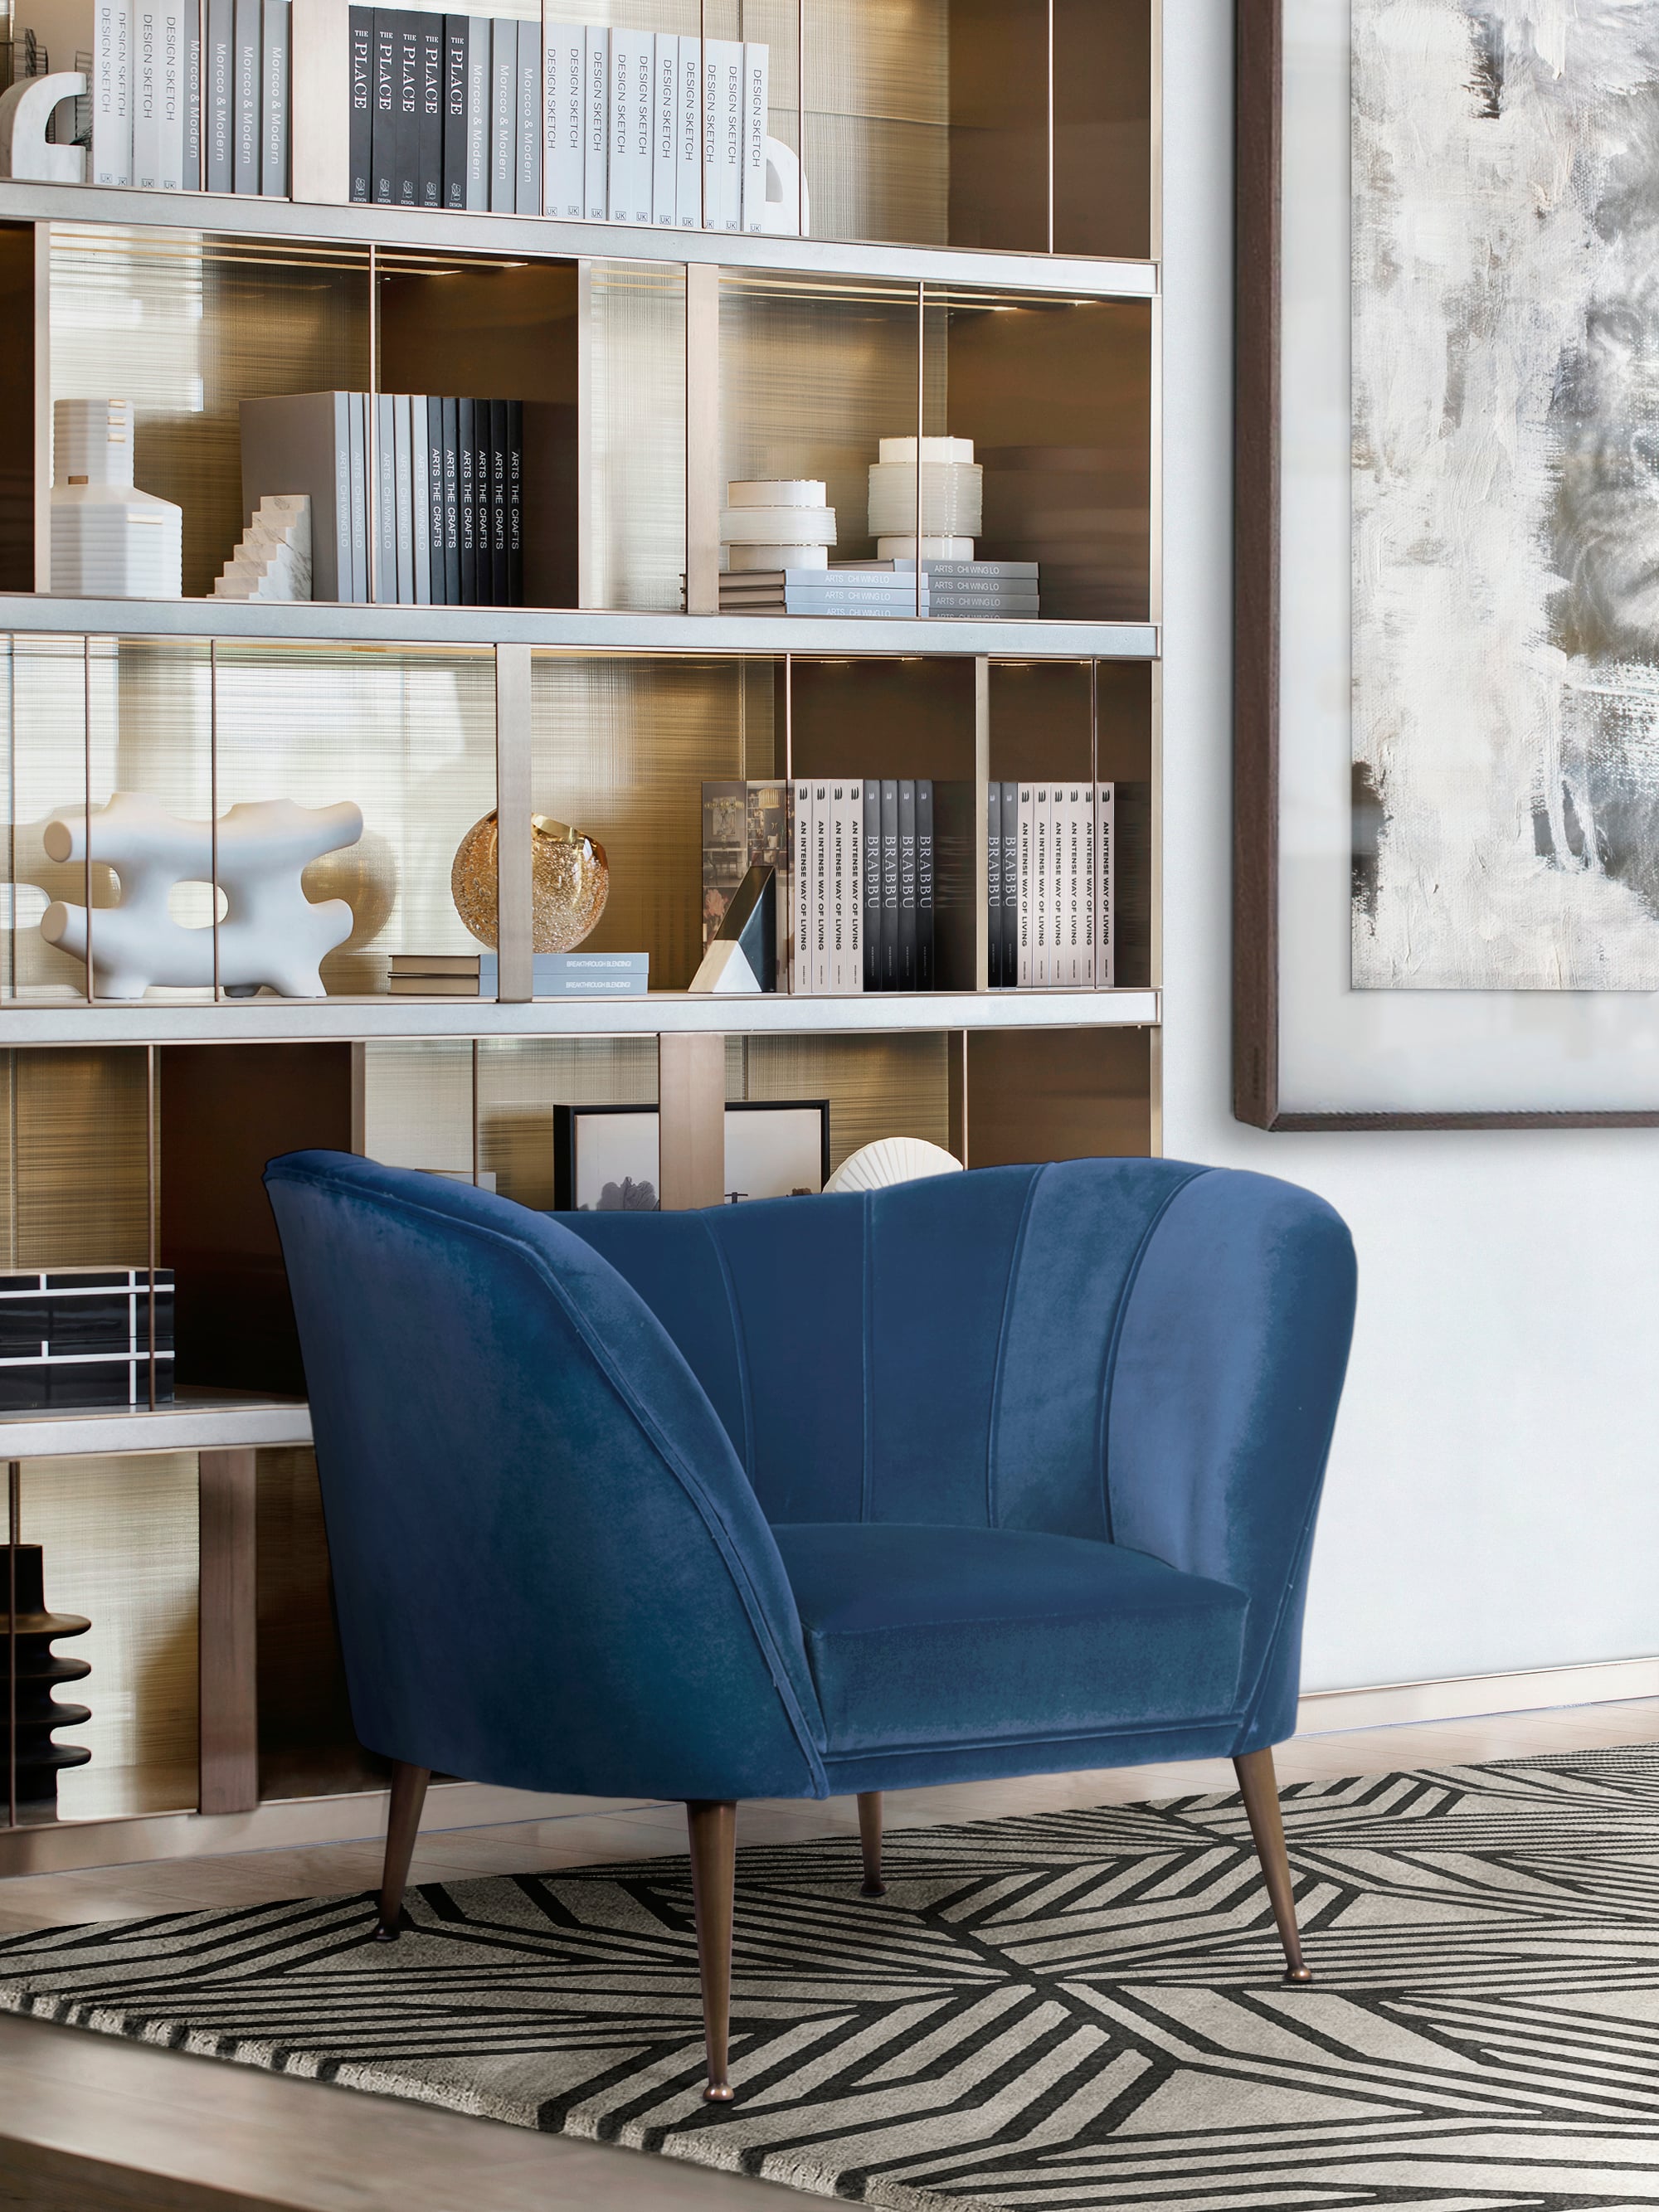 Modern Reading Corner With Blue Upholstered Armchair - Home'Society